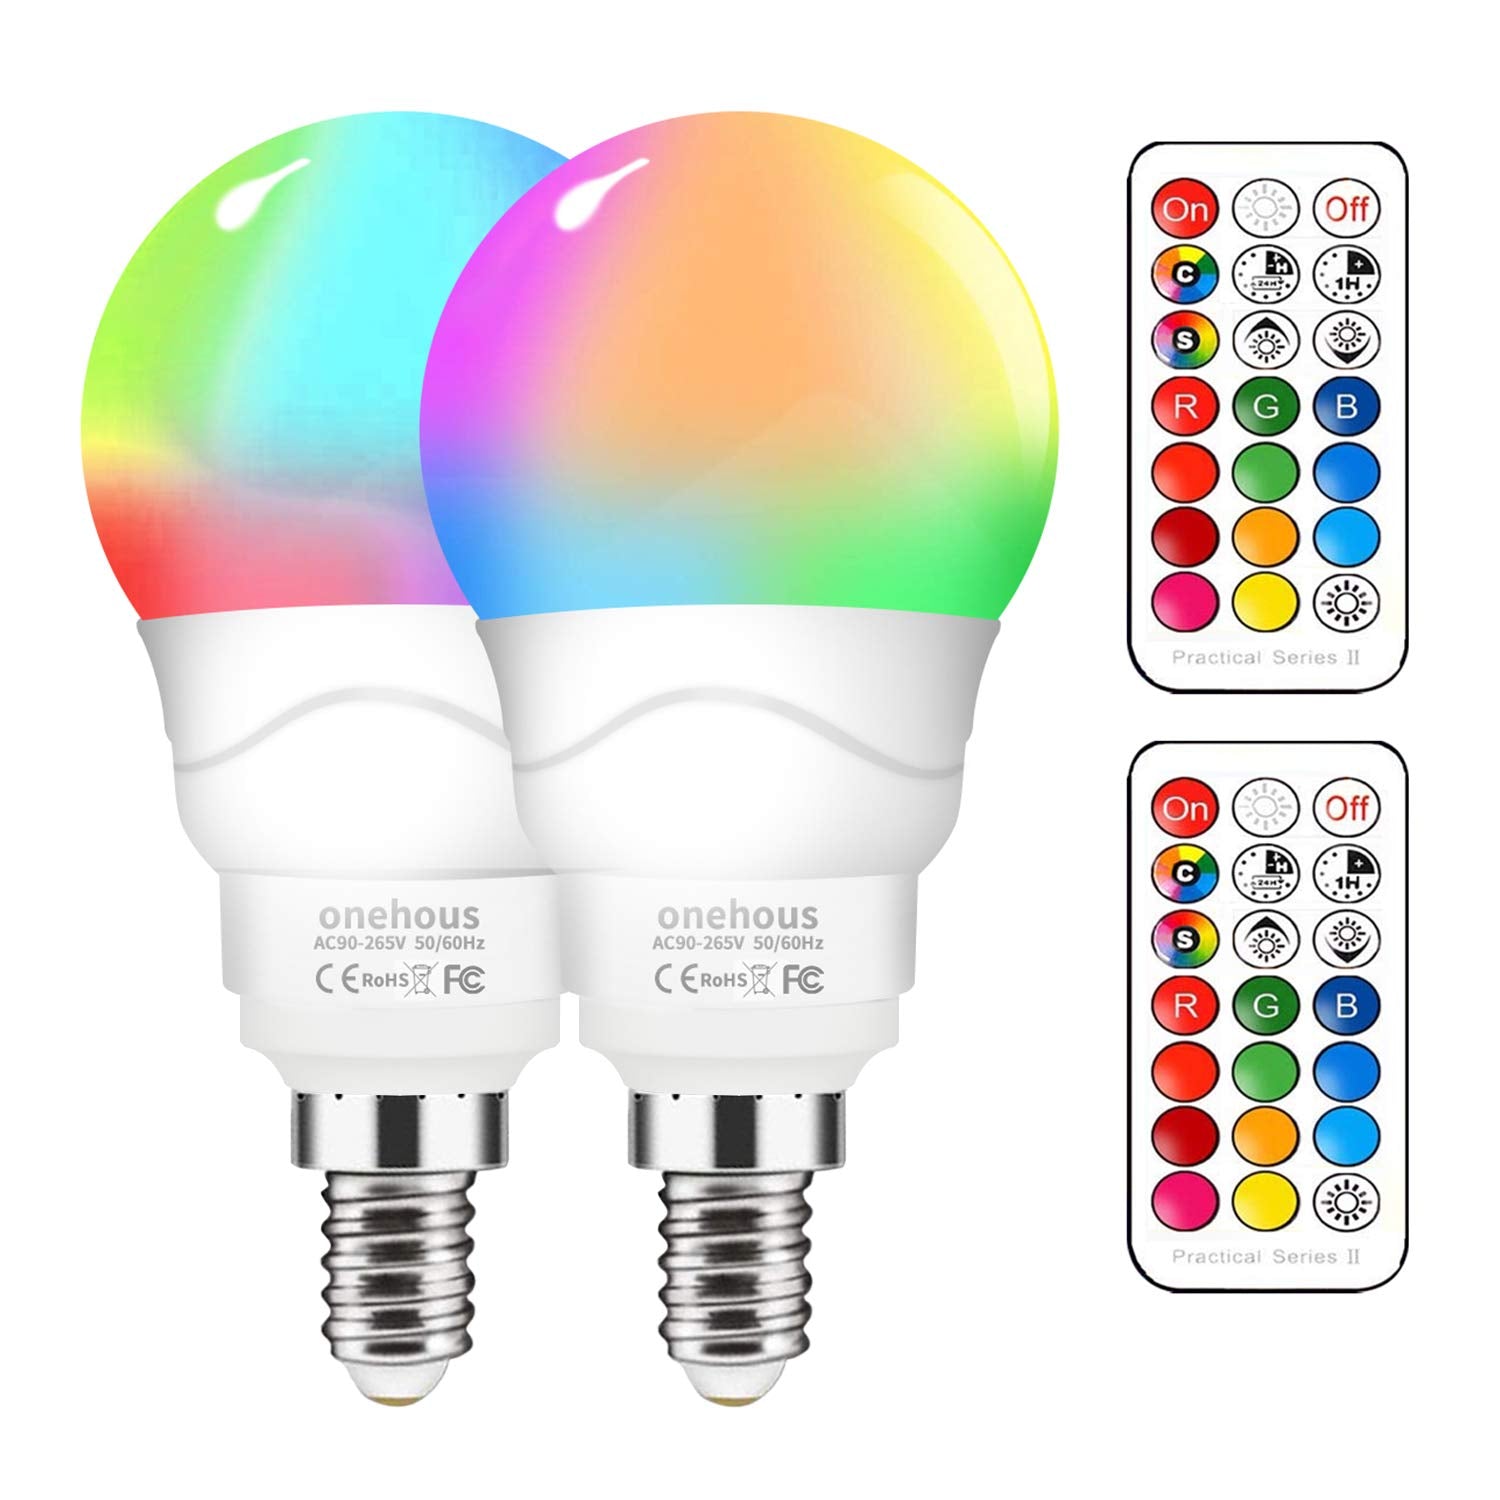 Colour Changing Light Bulbs, onehous 2 Pack E14 LED Dimmable Disco Light Bulb with Remote Control, RGBW Energy Saving Mood Lights, 6W Small Screw Cool Rainbow Night Lighting for Home Party Pub Bar